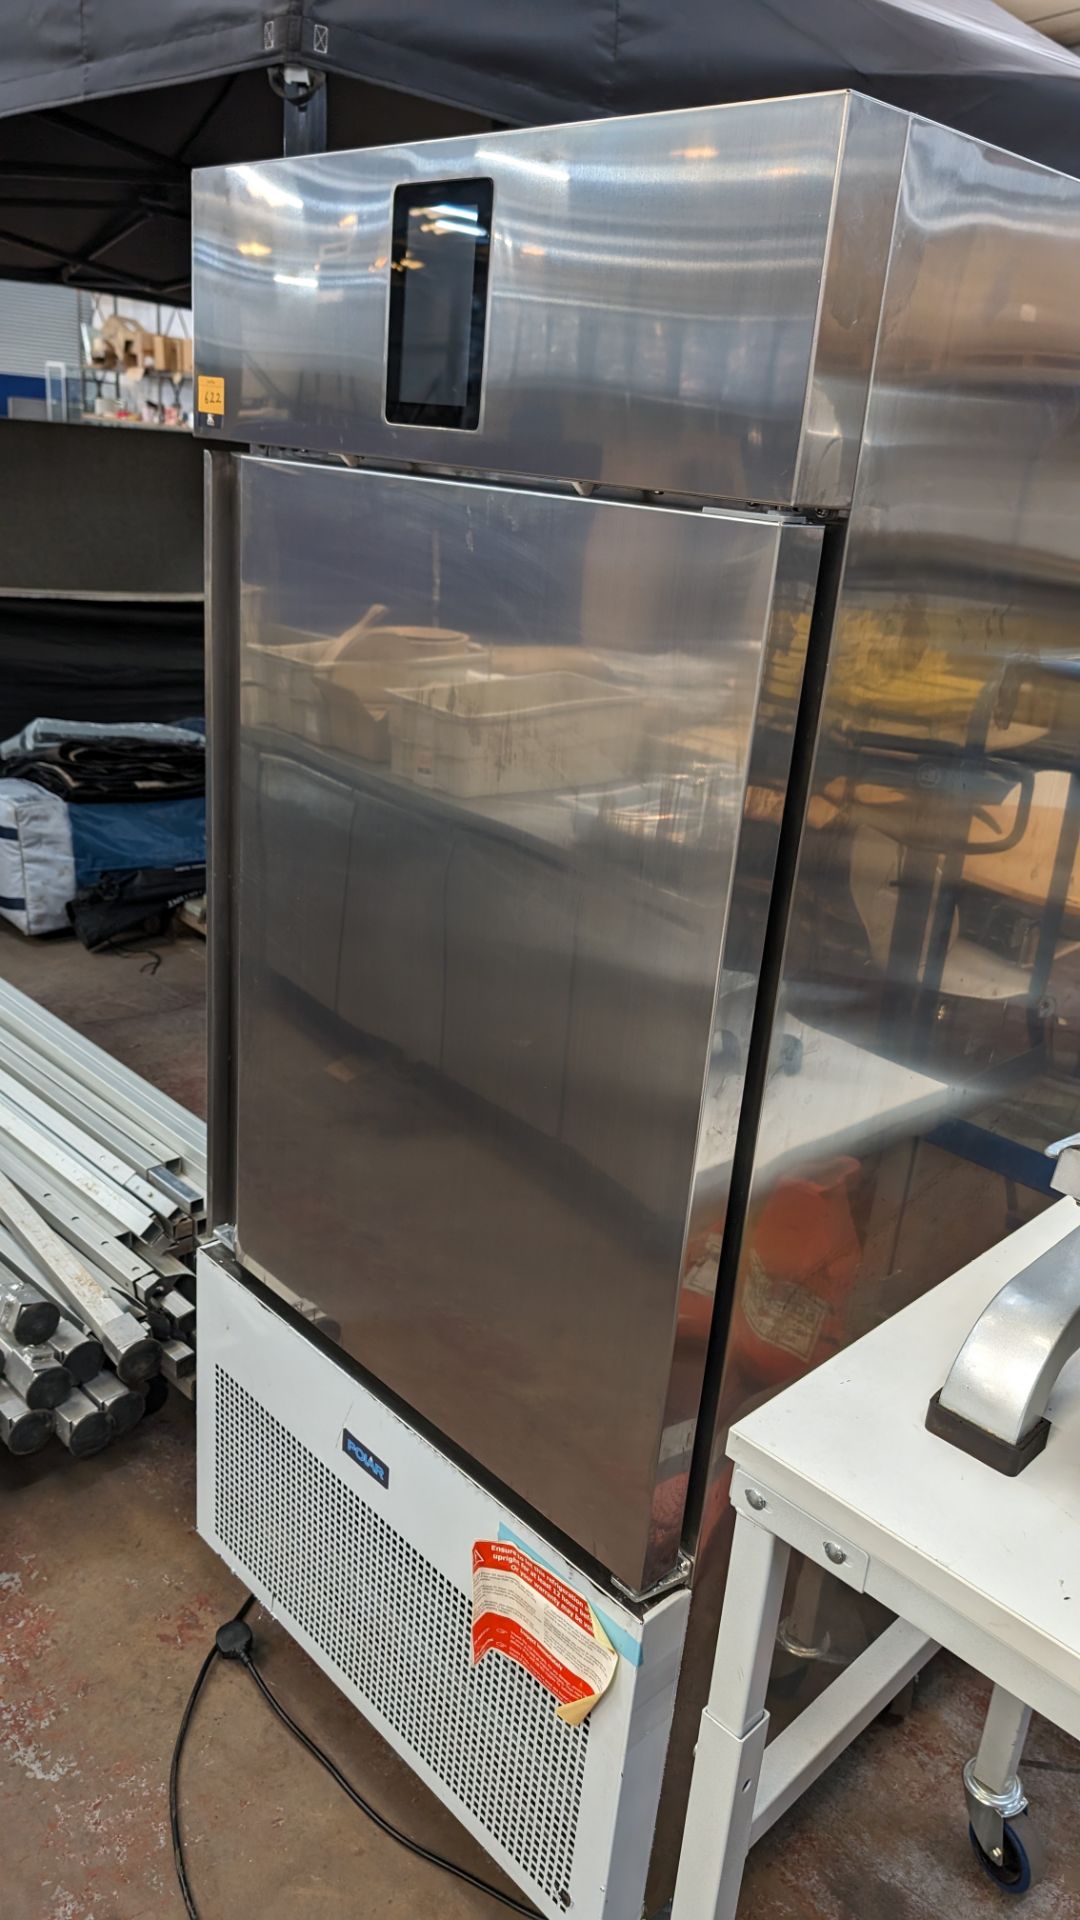 Polar Refrigeration mobile stainless steel commercial blast chiller with touchscreen controls - Image 8 of 9